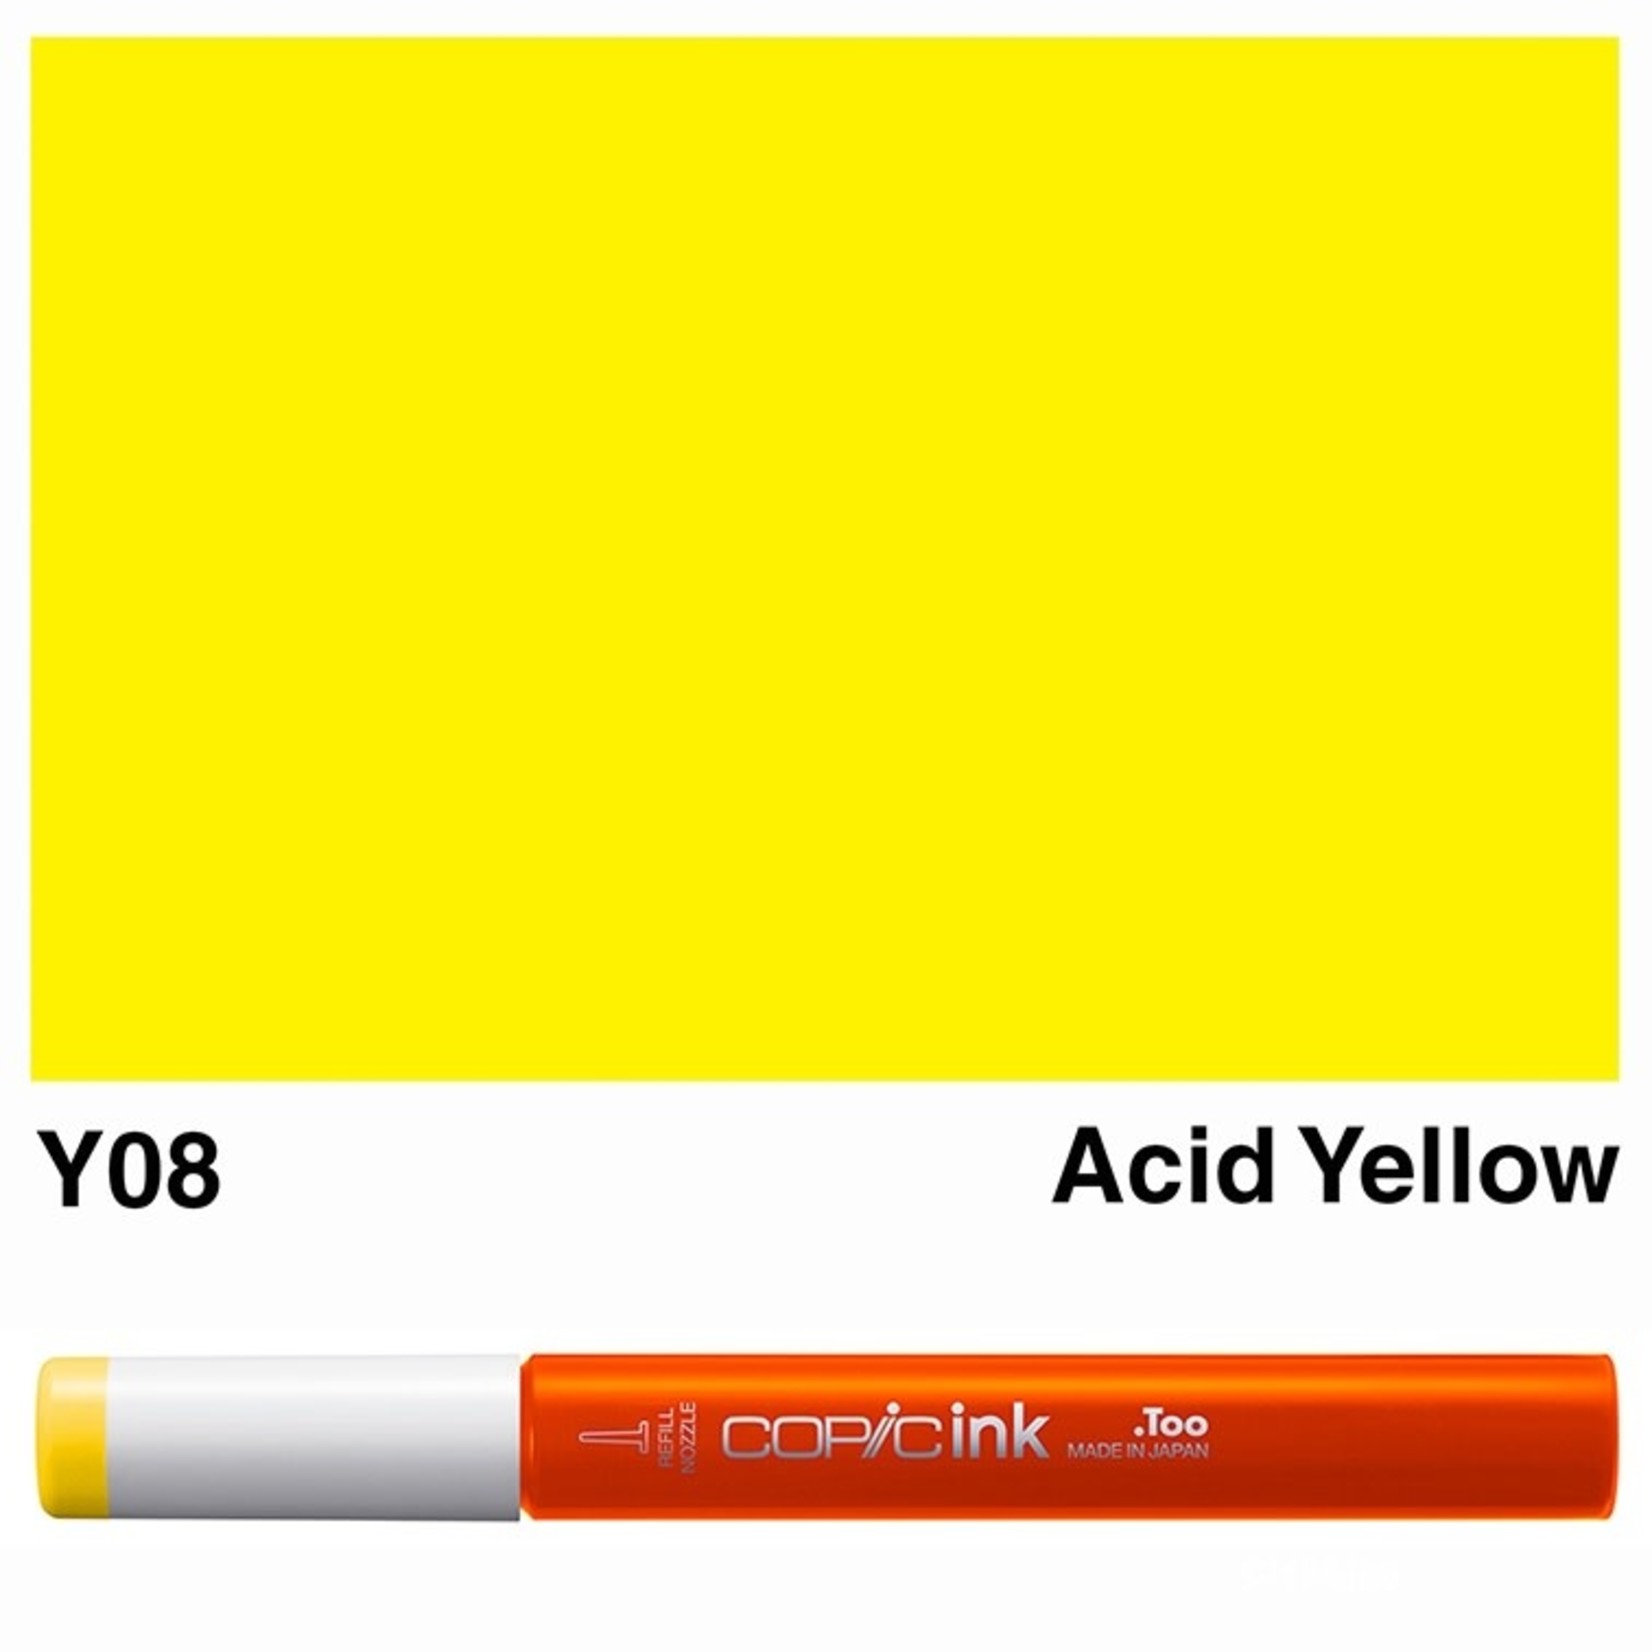 Copic Copic Various Ink Y08 Acid Yellow